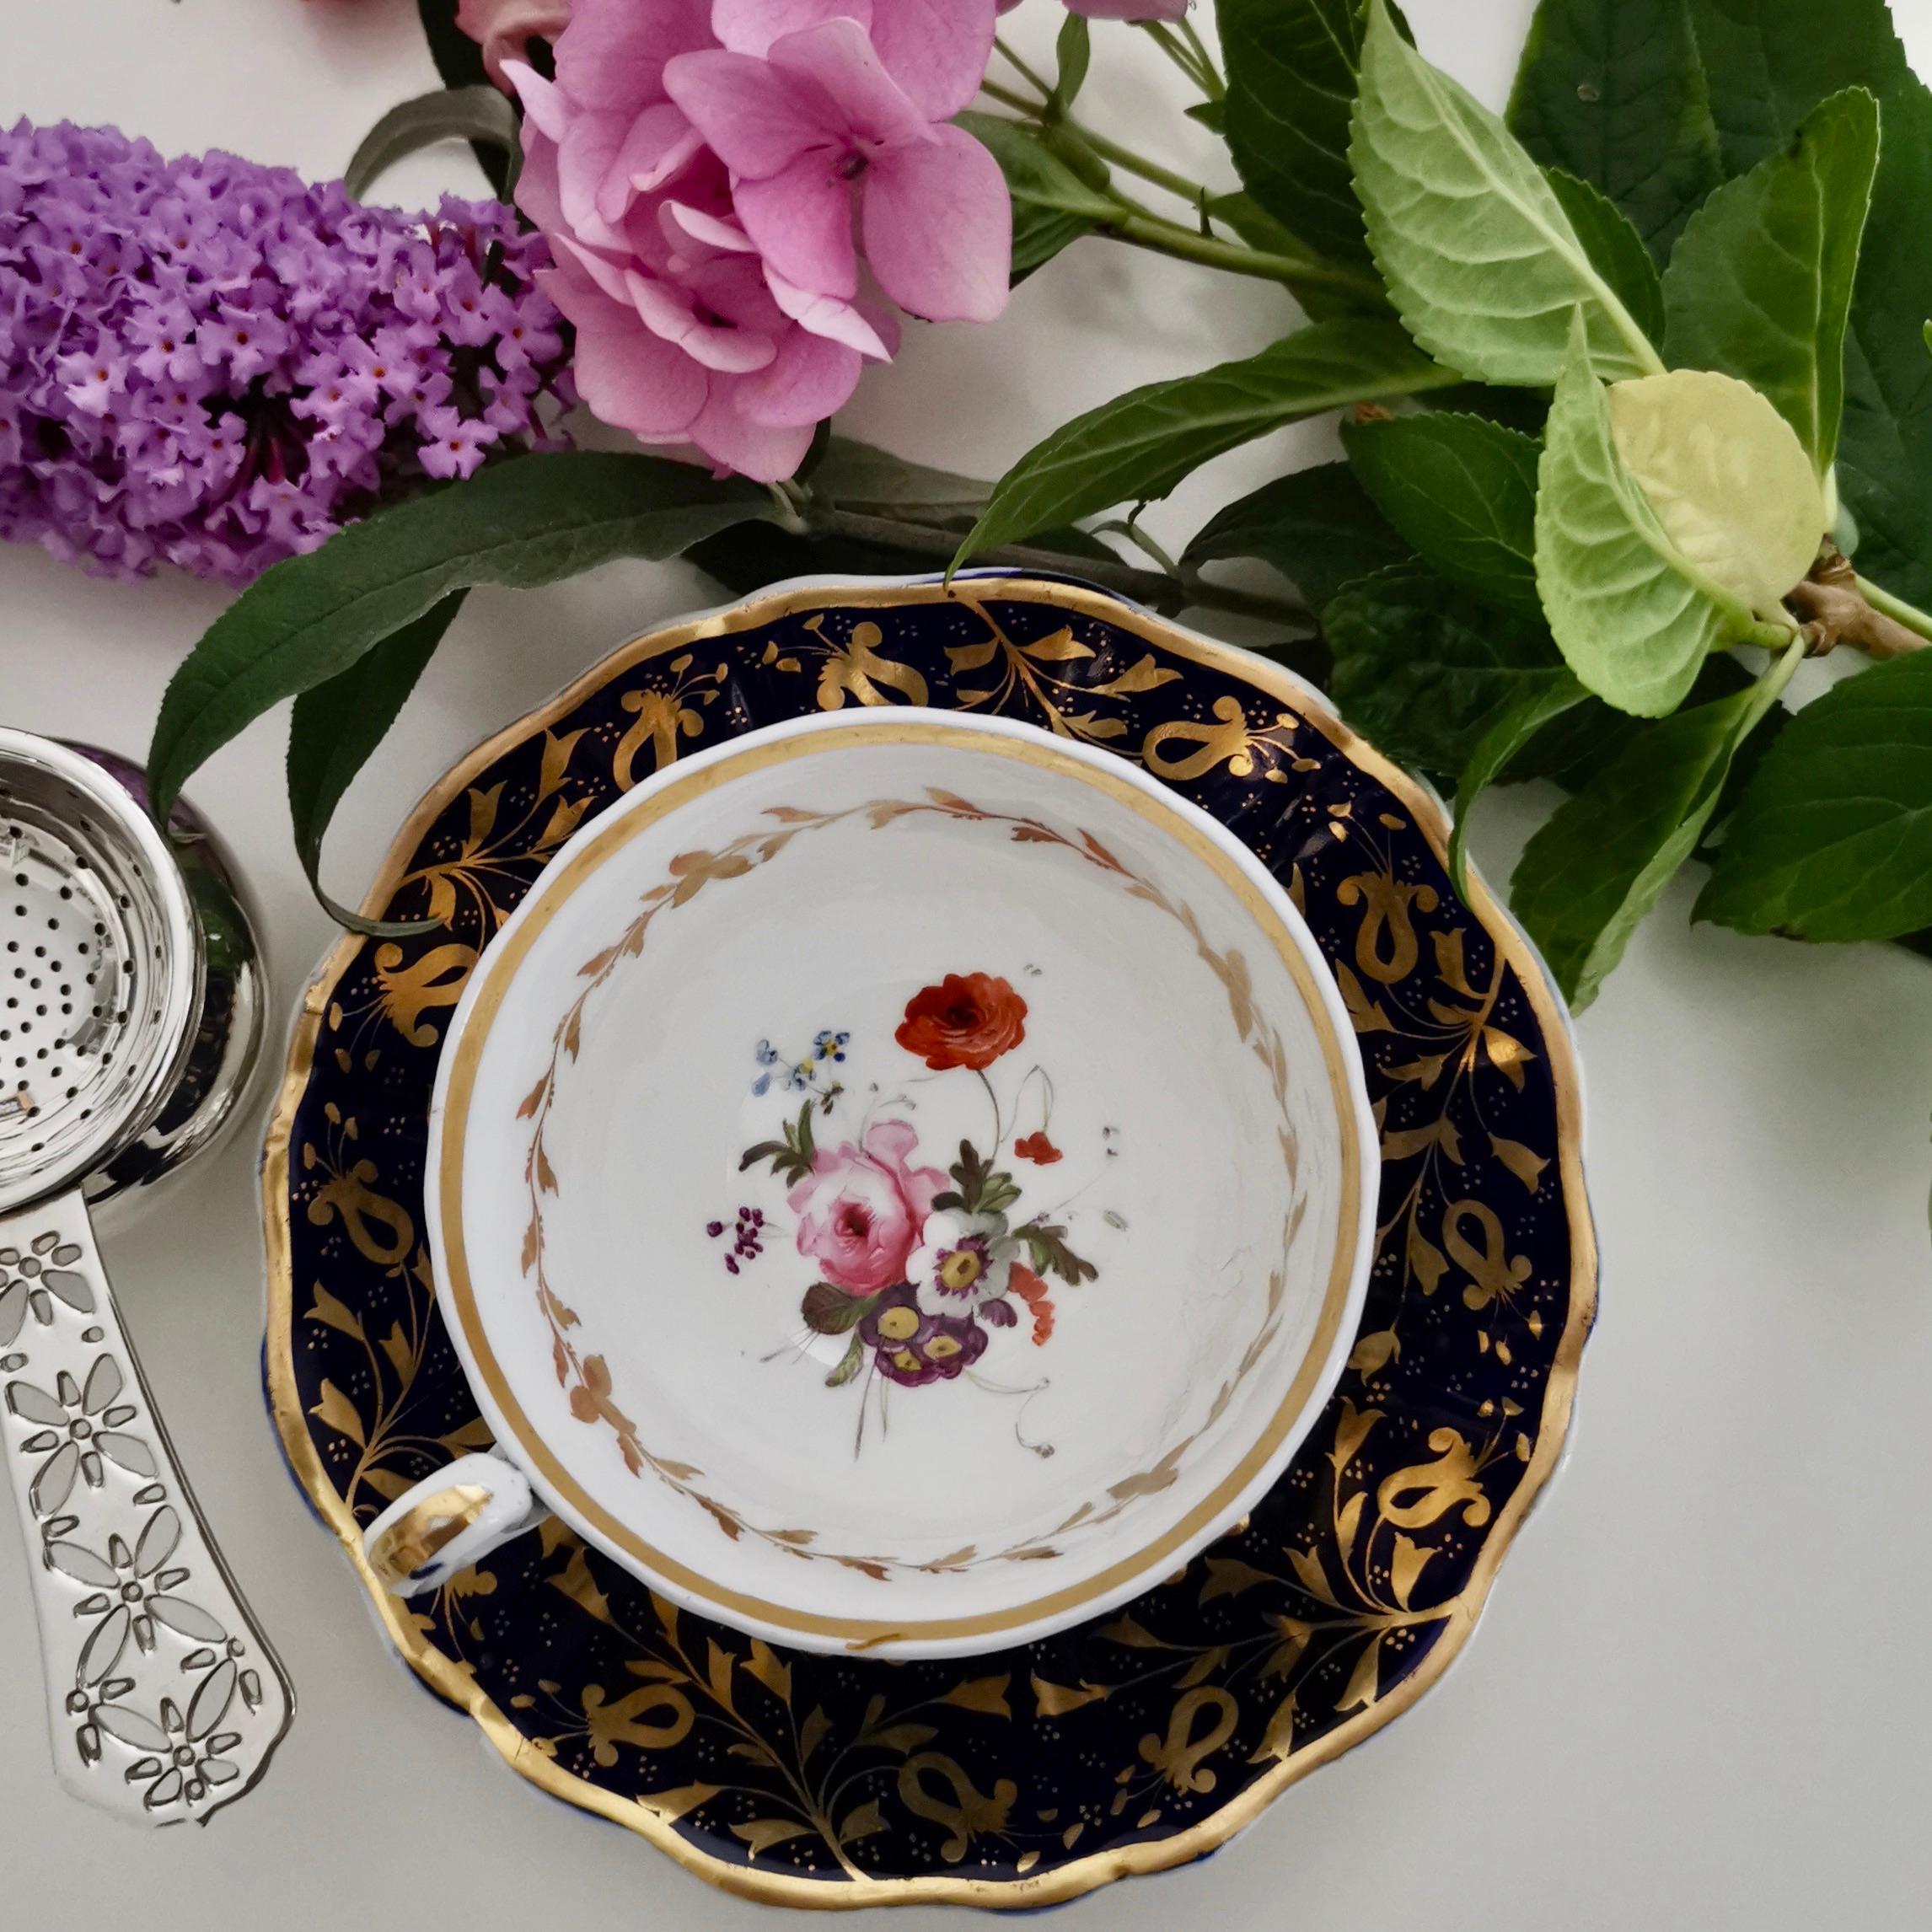 On offer is a teacup and saucer made by Samuel Alcock circa year 1820 during the Regency era.

Samuel Alcock was one of the many potters in Staffordshire such as Spode, Coalport, H&R Daniel and many others during the 1830s and 1840s. He was